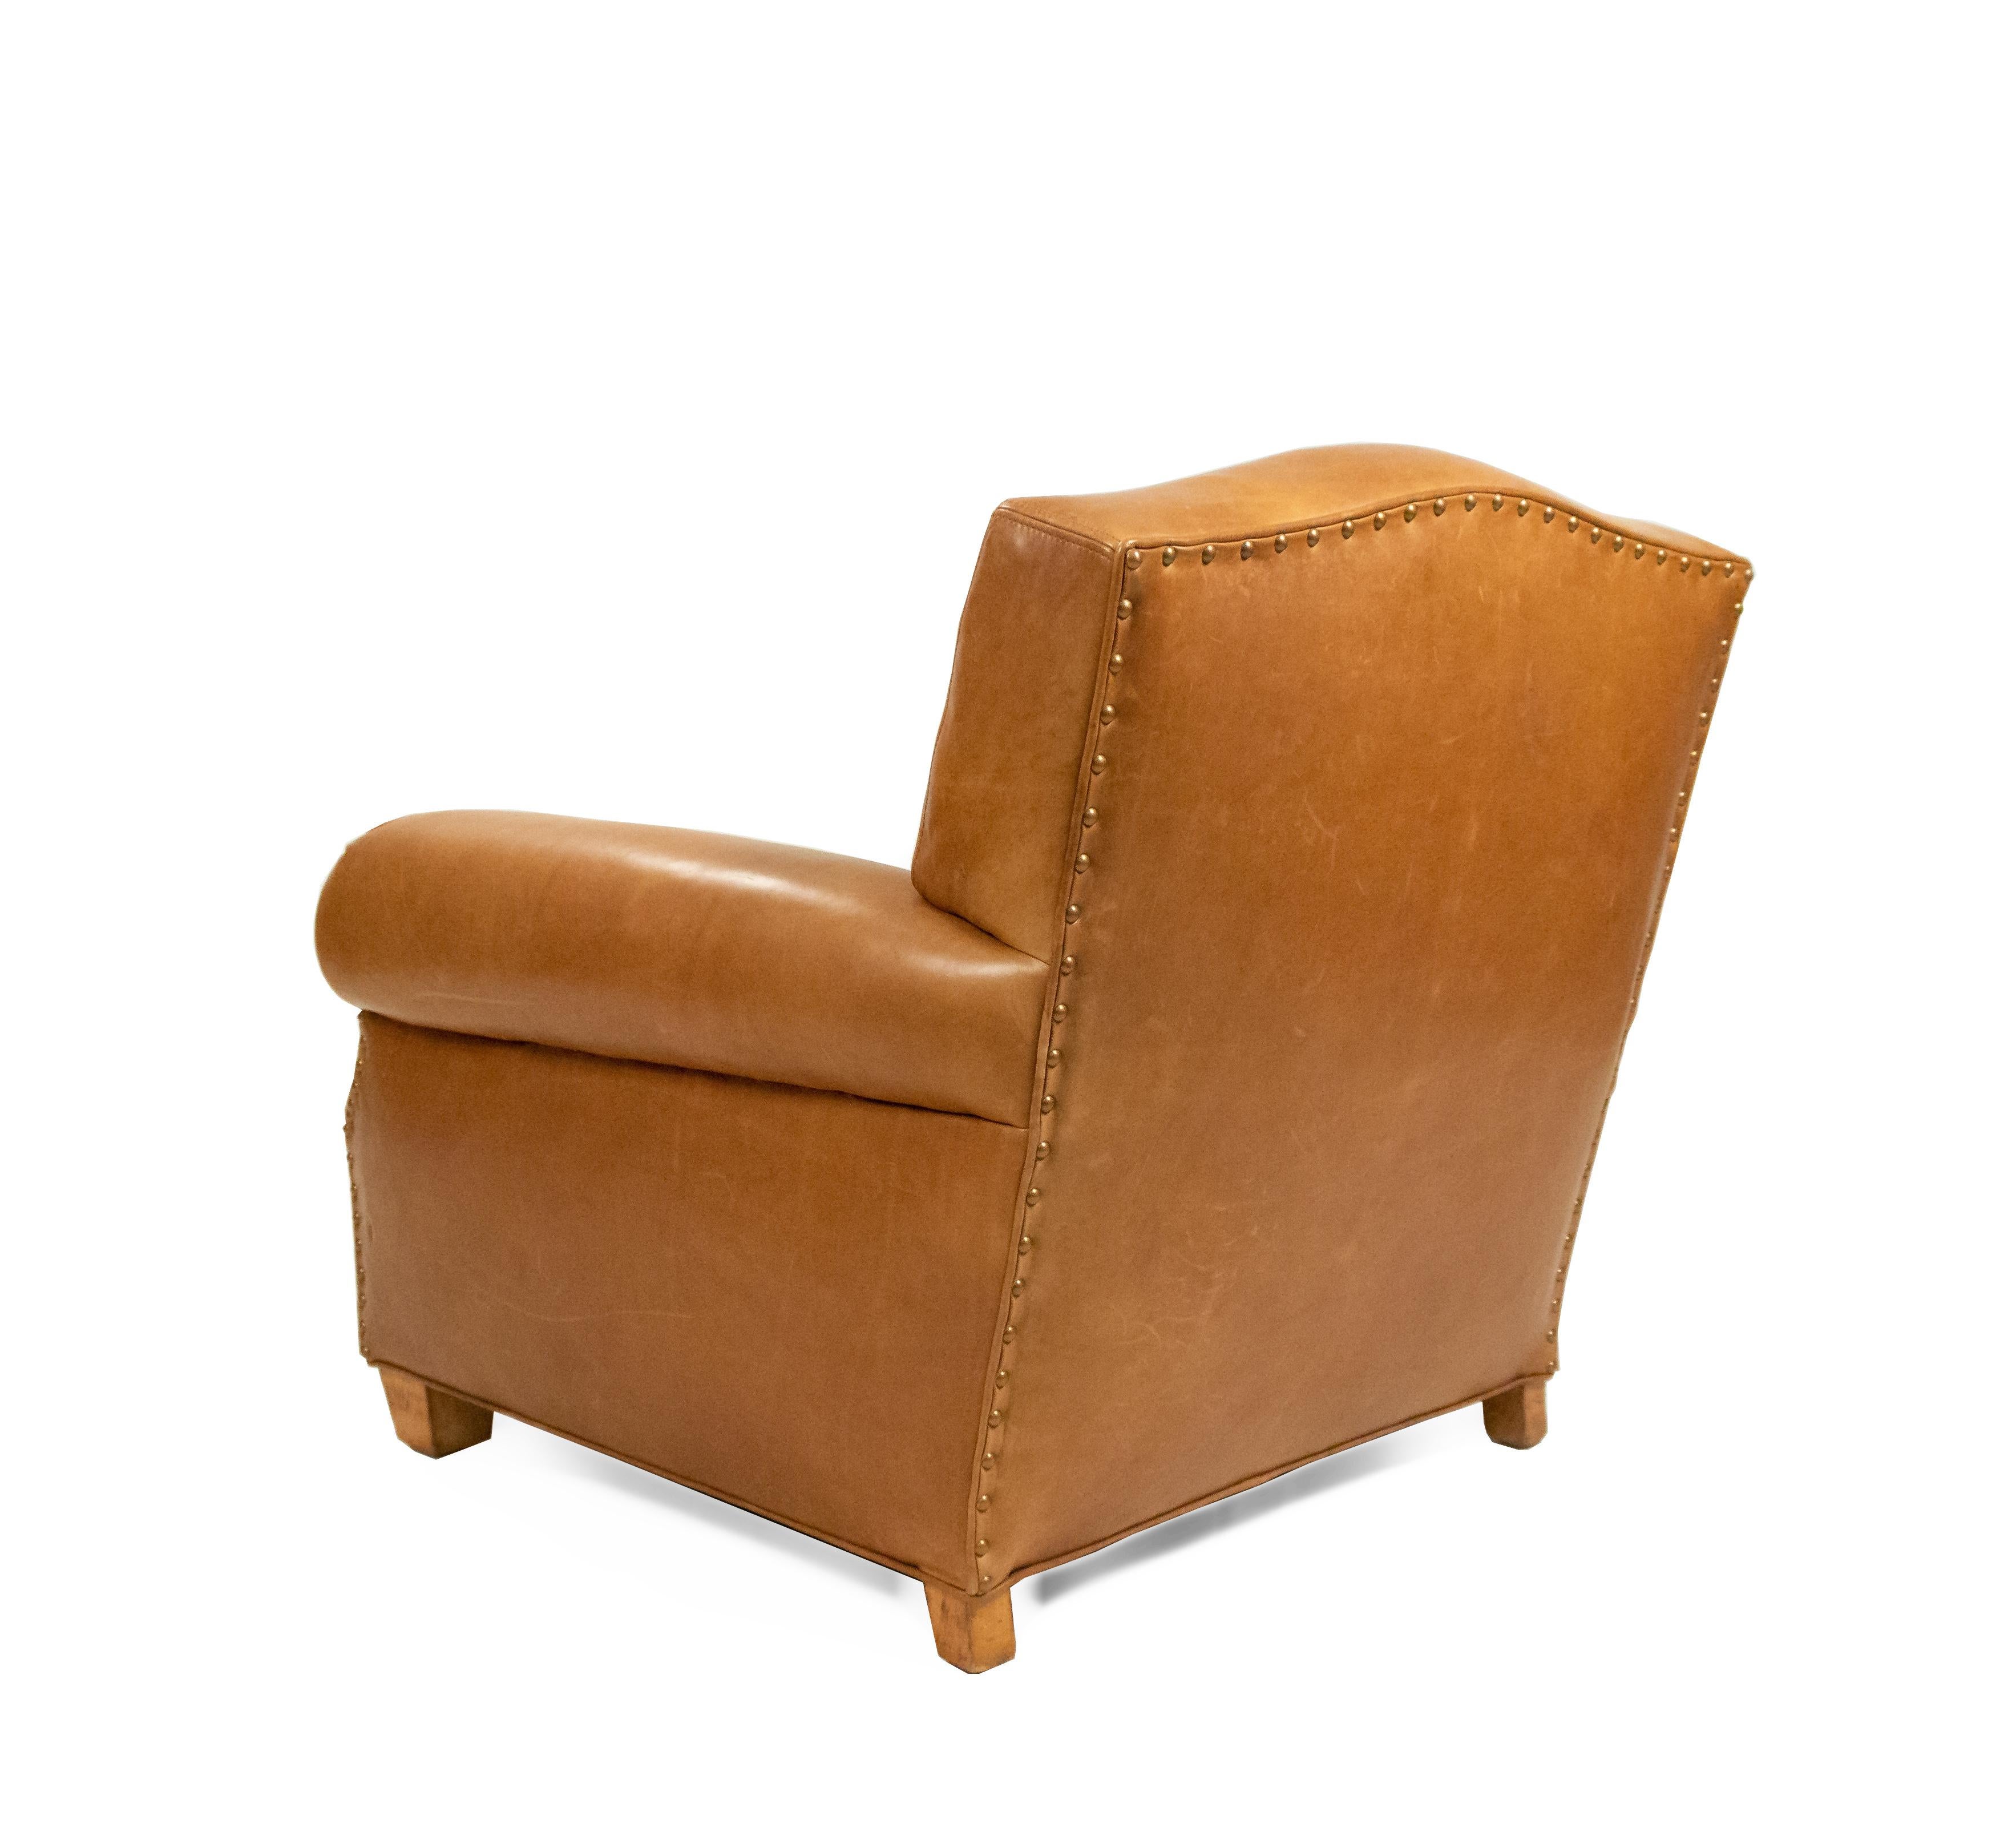 French Art Deco Style Tan Leather Club Chairs 2